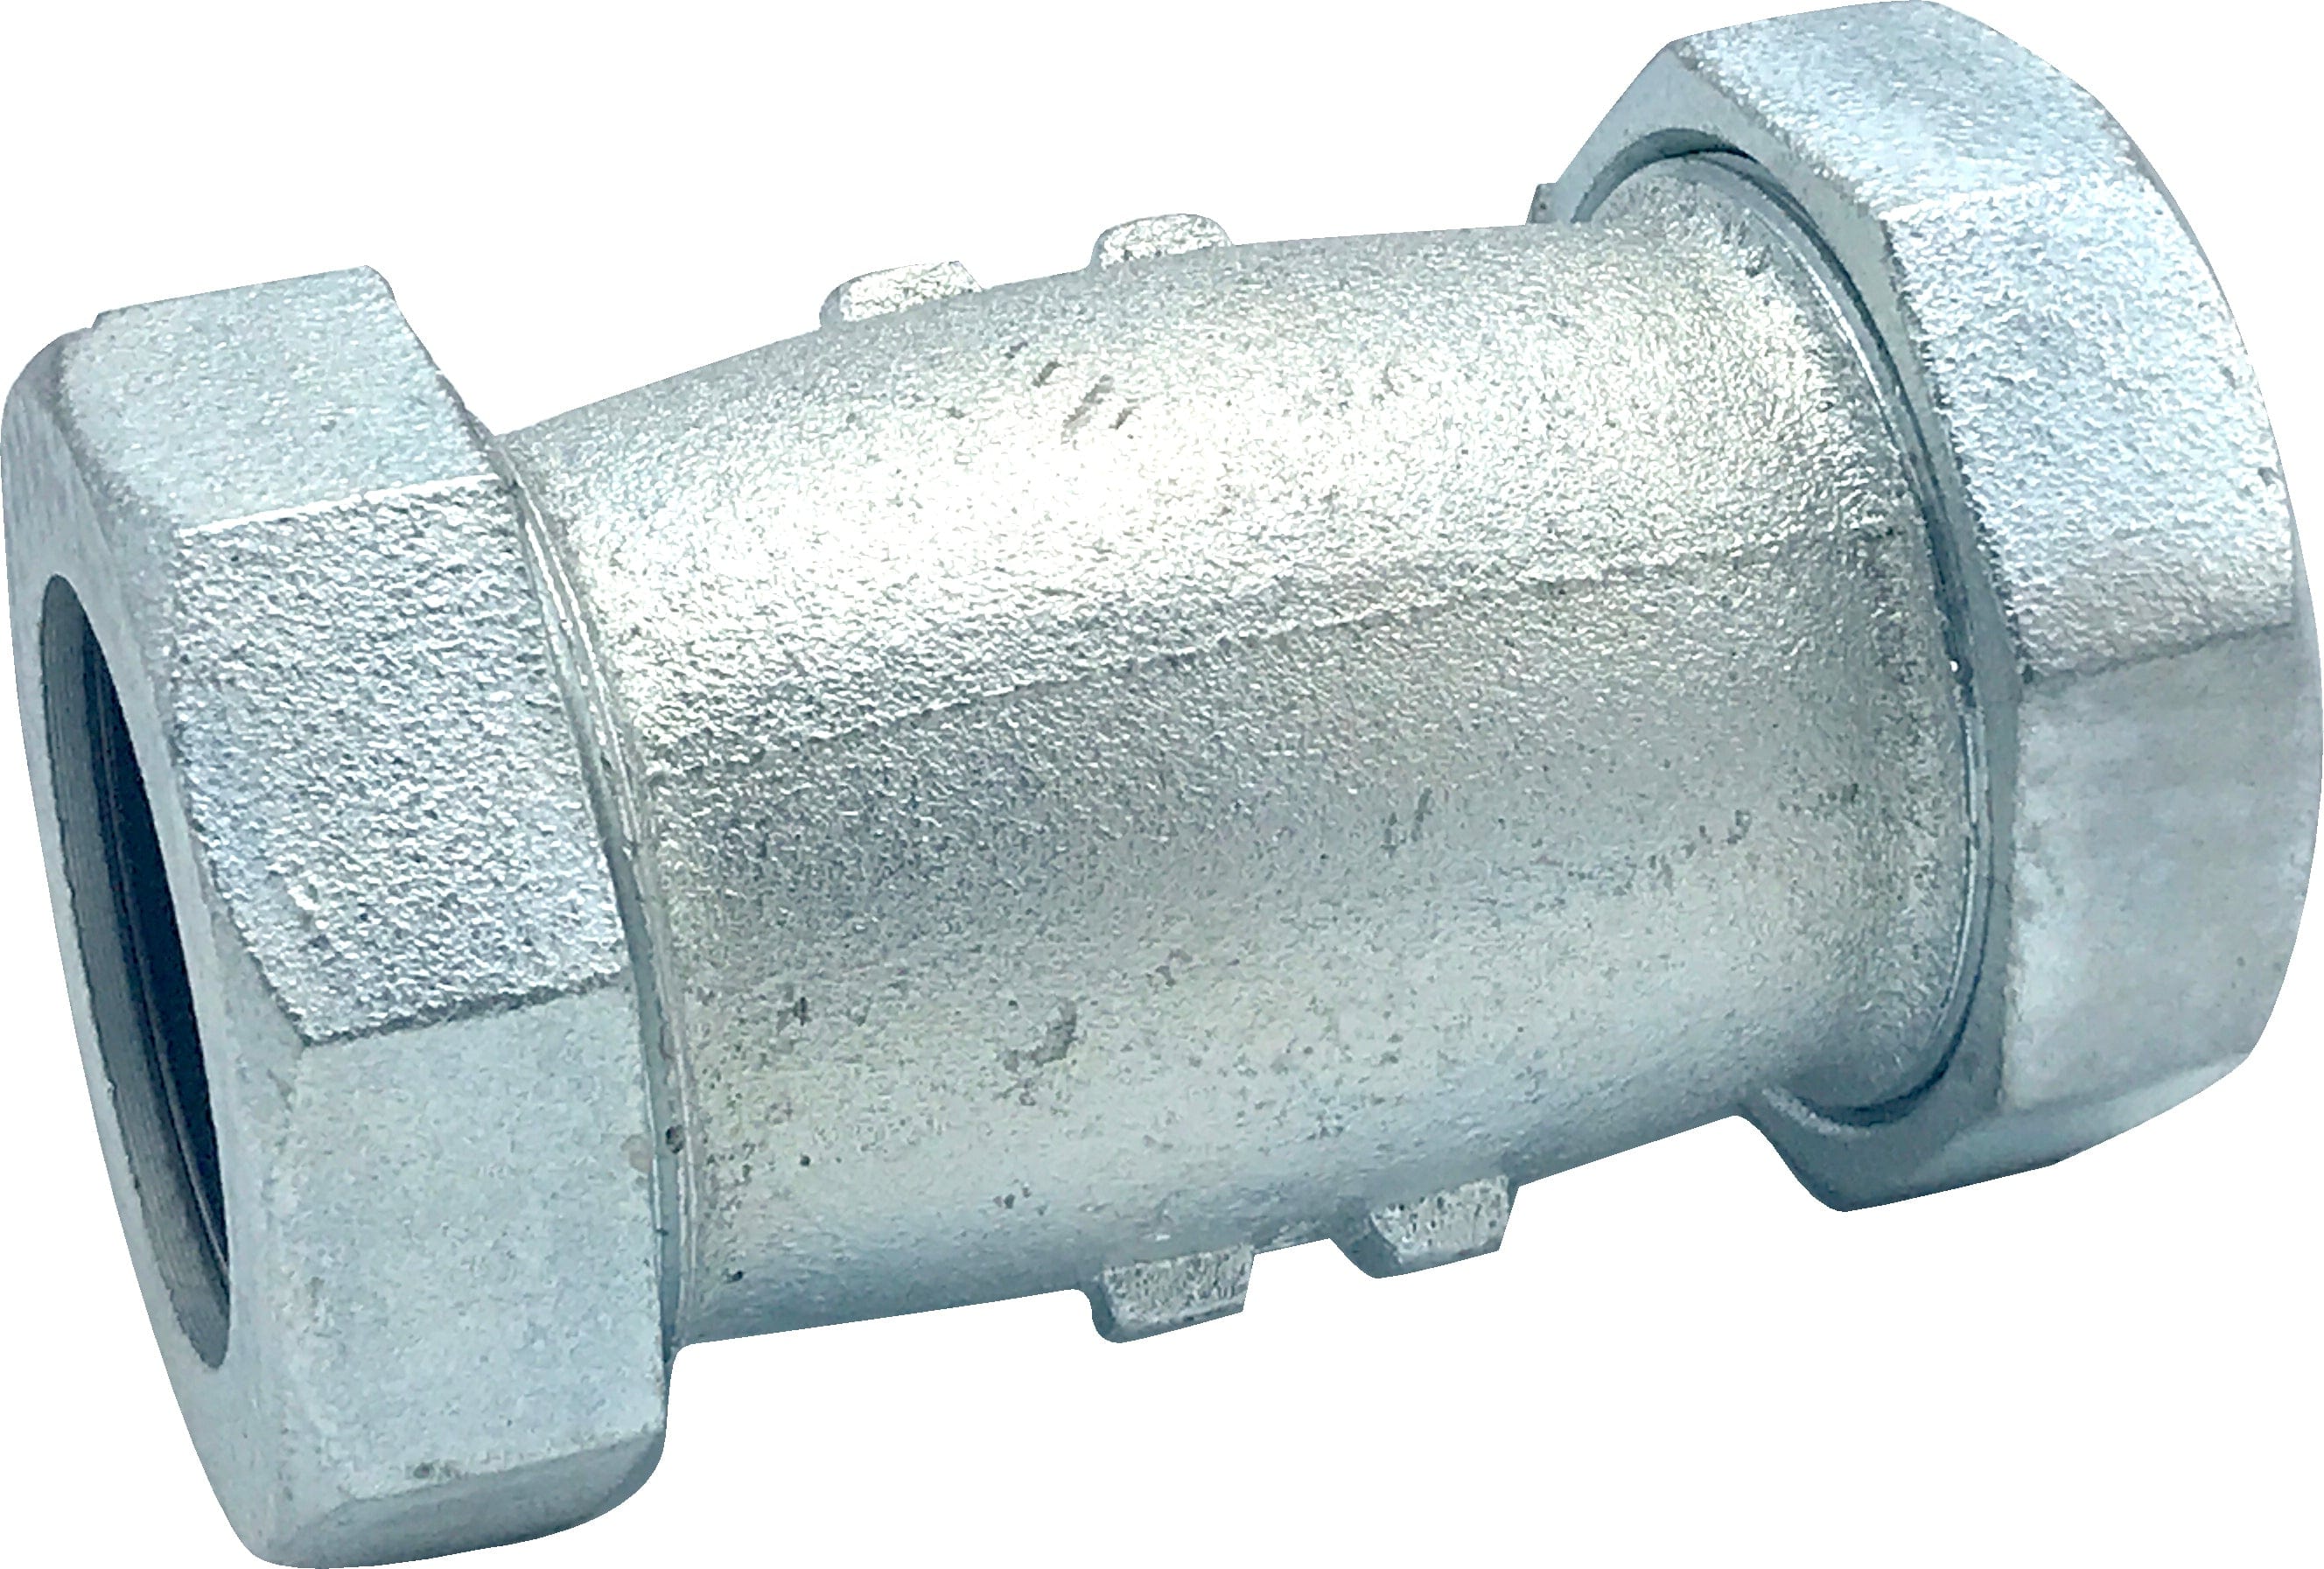 2 1/2" Long Galvanized Compression Coupling